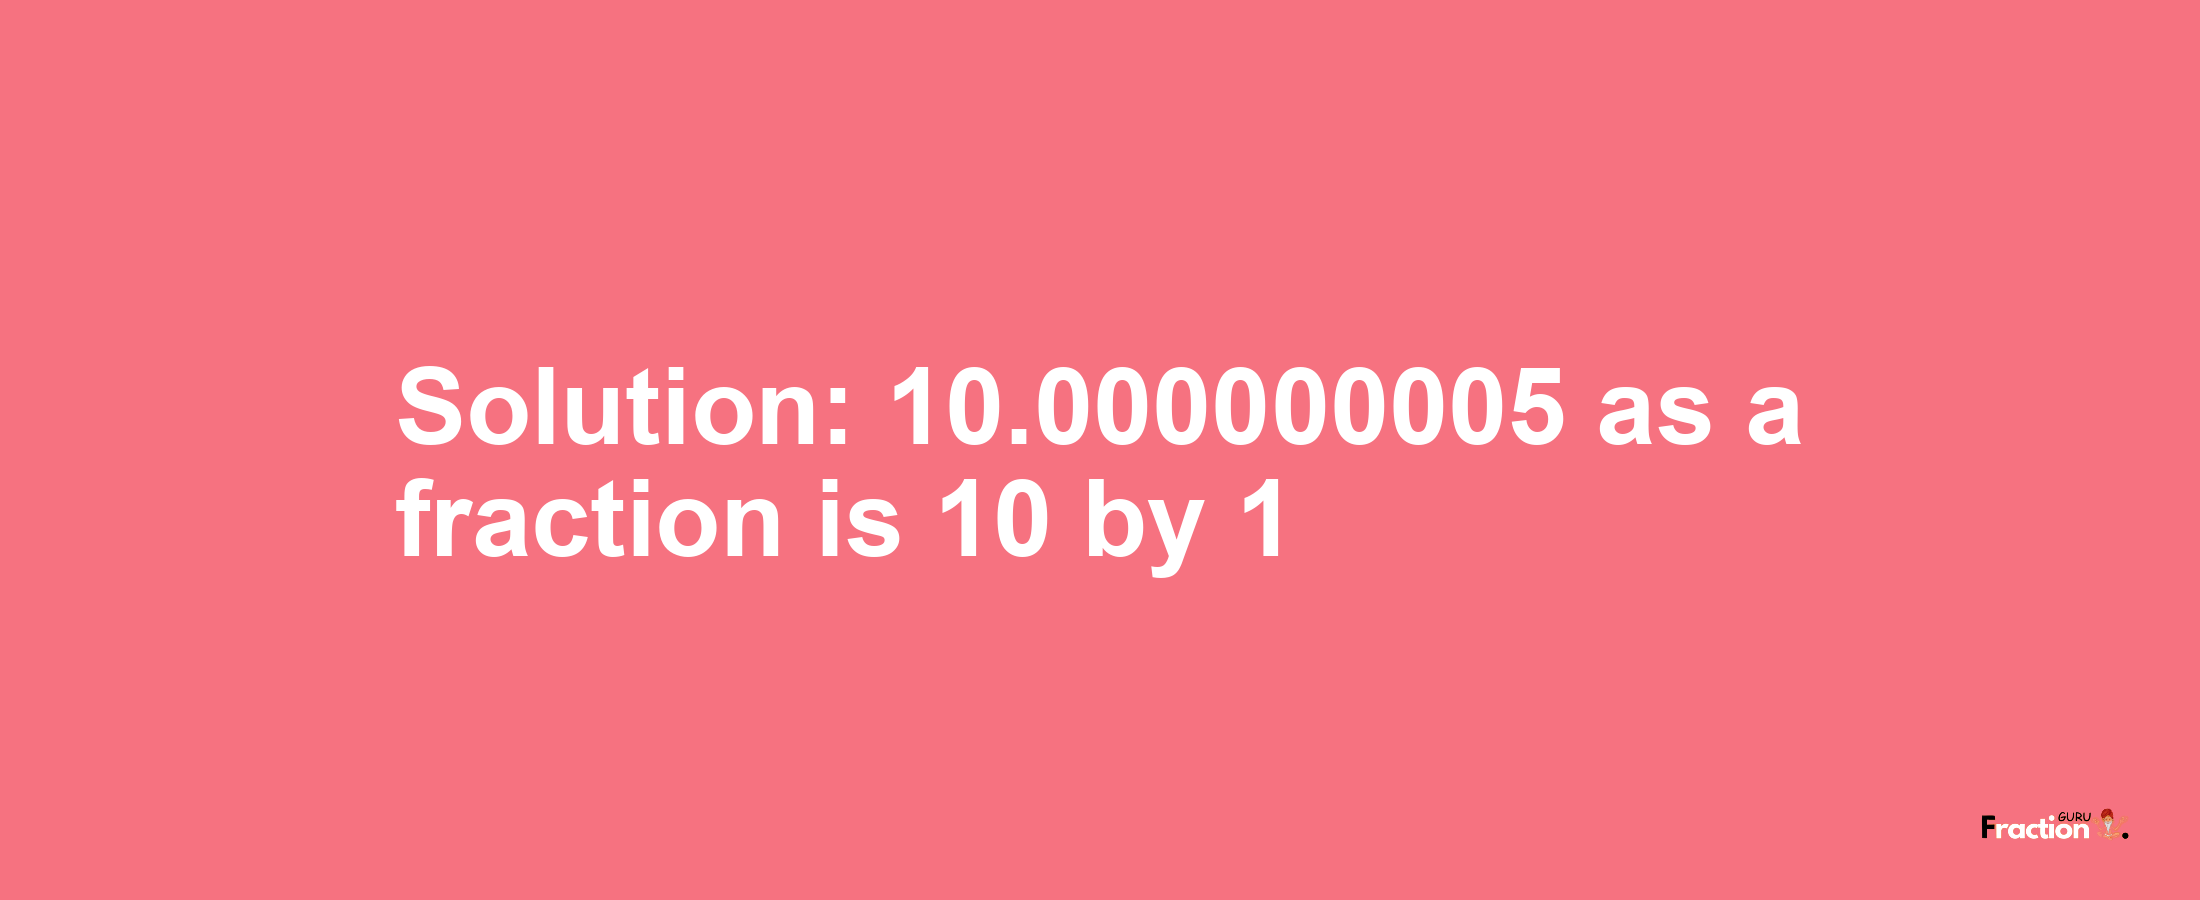 Solution:10.000000005 as a fraction is 10/1